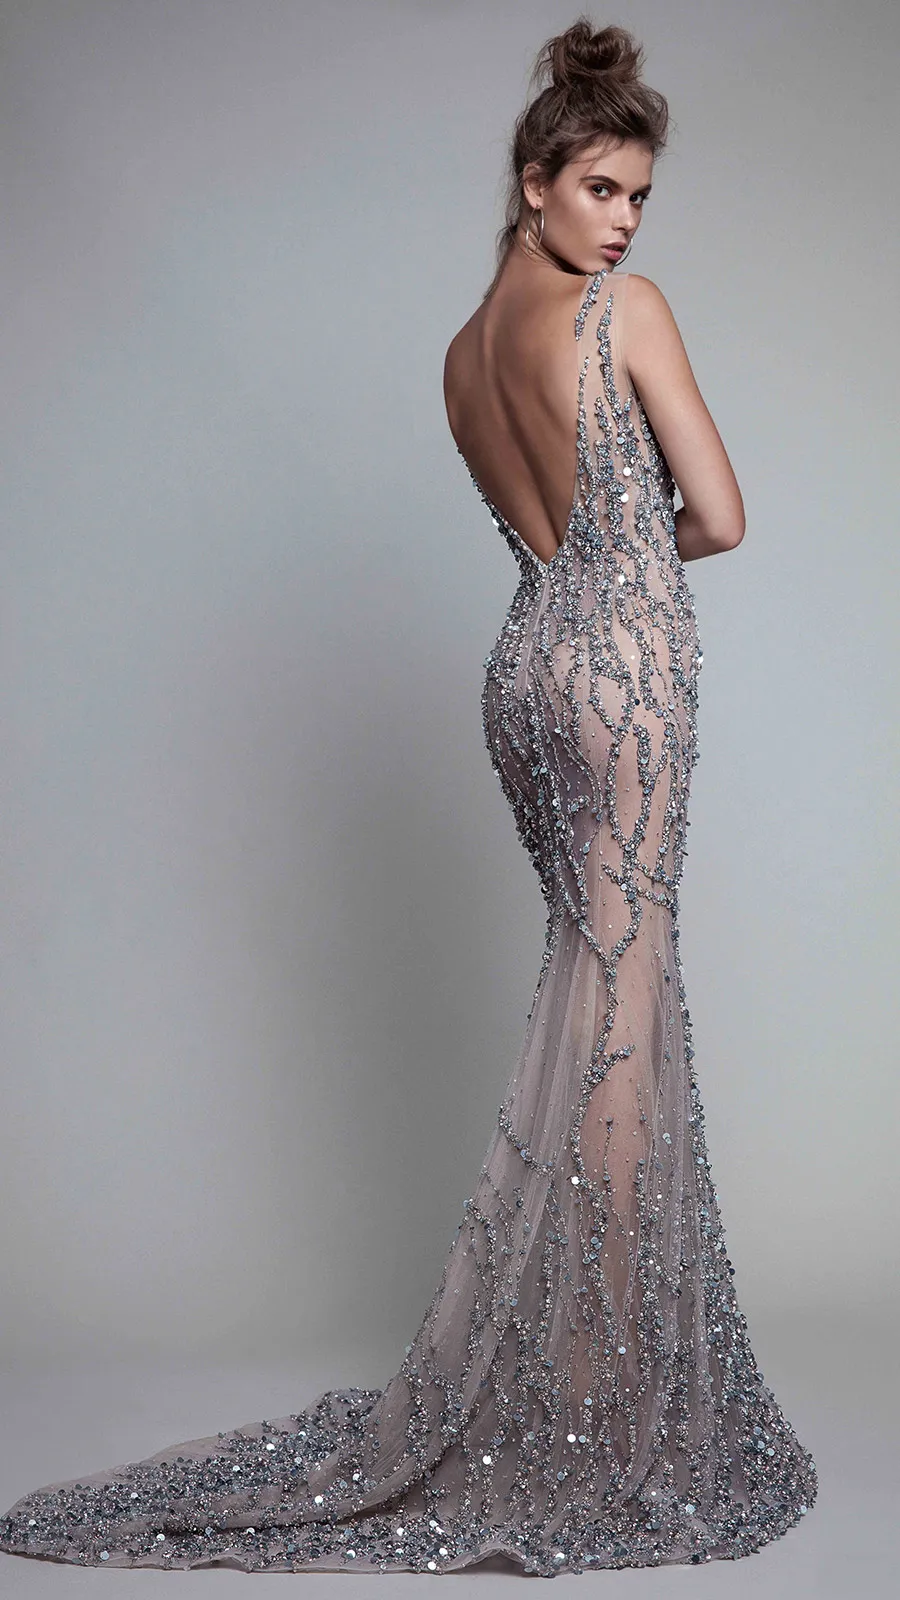 Super Sexy Charming Evening Dresses Illusion Backless Sleeveless Prom Gowns Mermaid Beaded Sweep Train Custom Made Pageant Dresses 2017